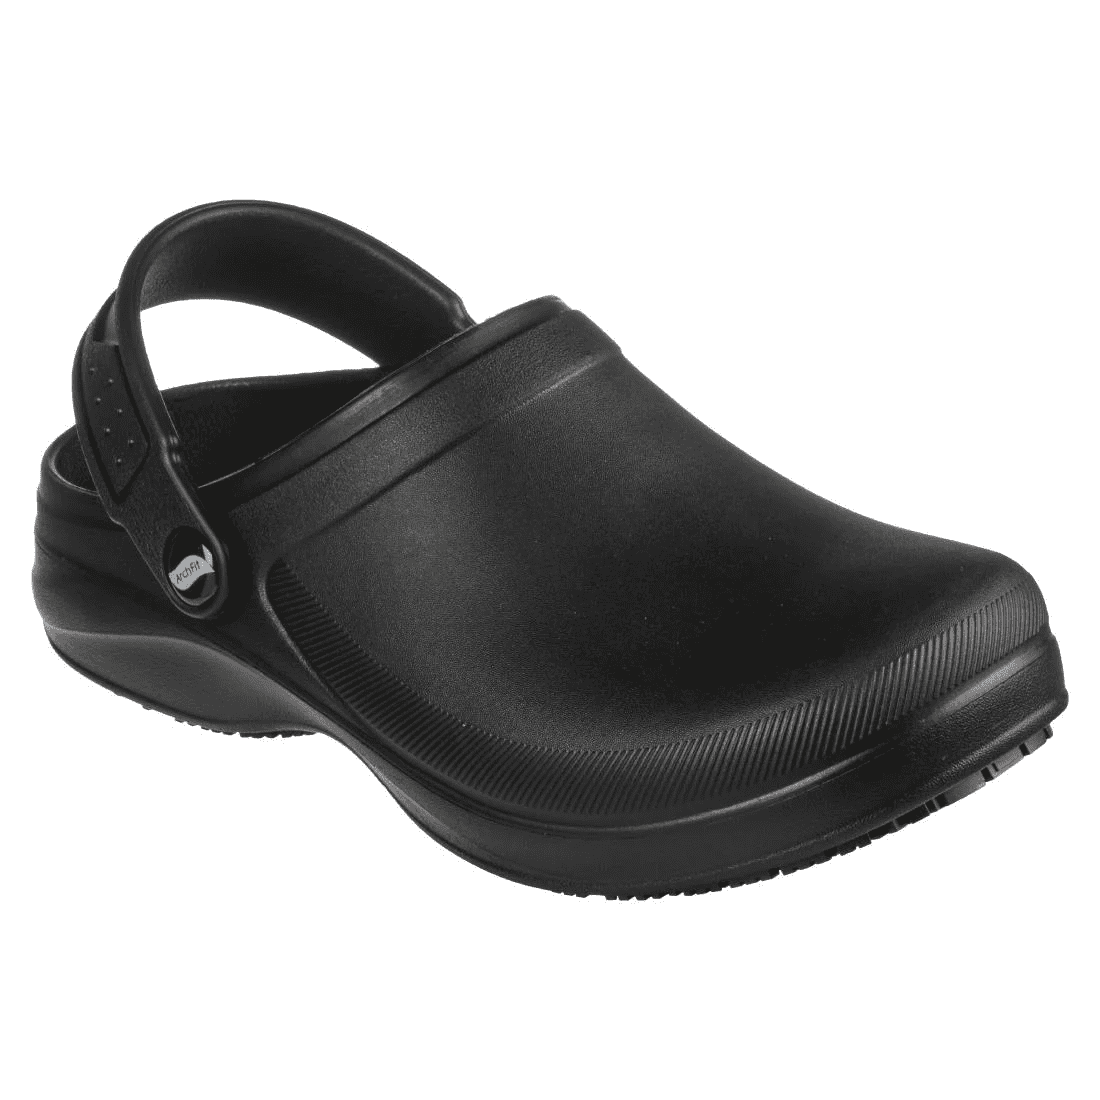 BB713-36 Skechers Womens Riverbound Pasay Slip Resistant Clogs